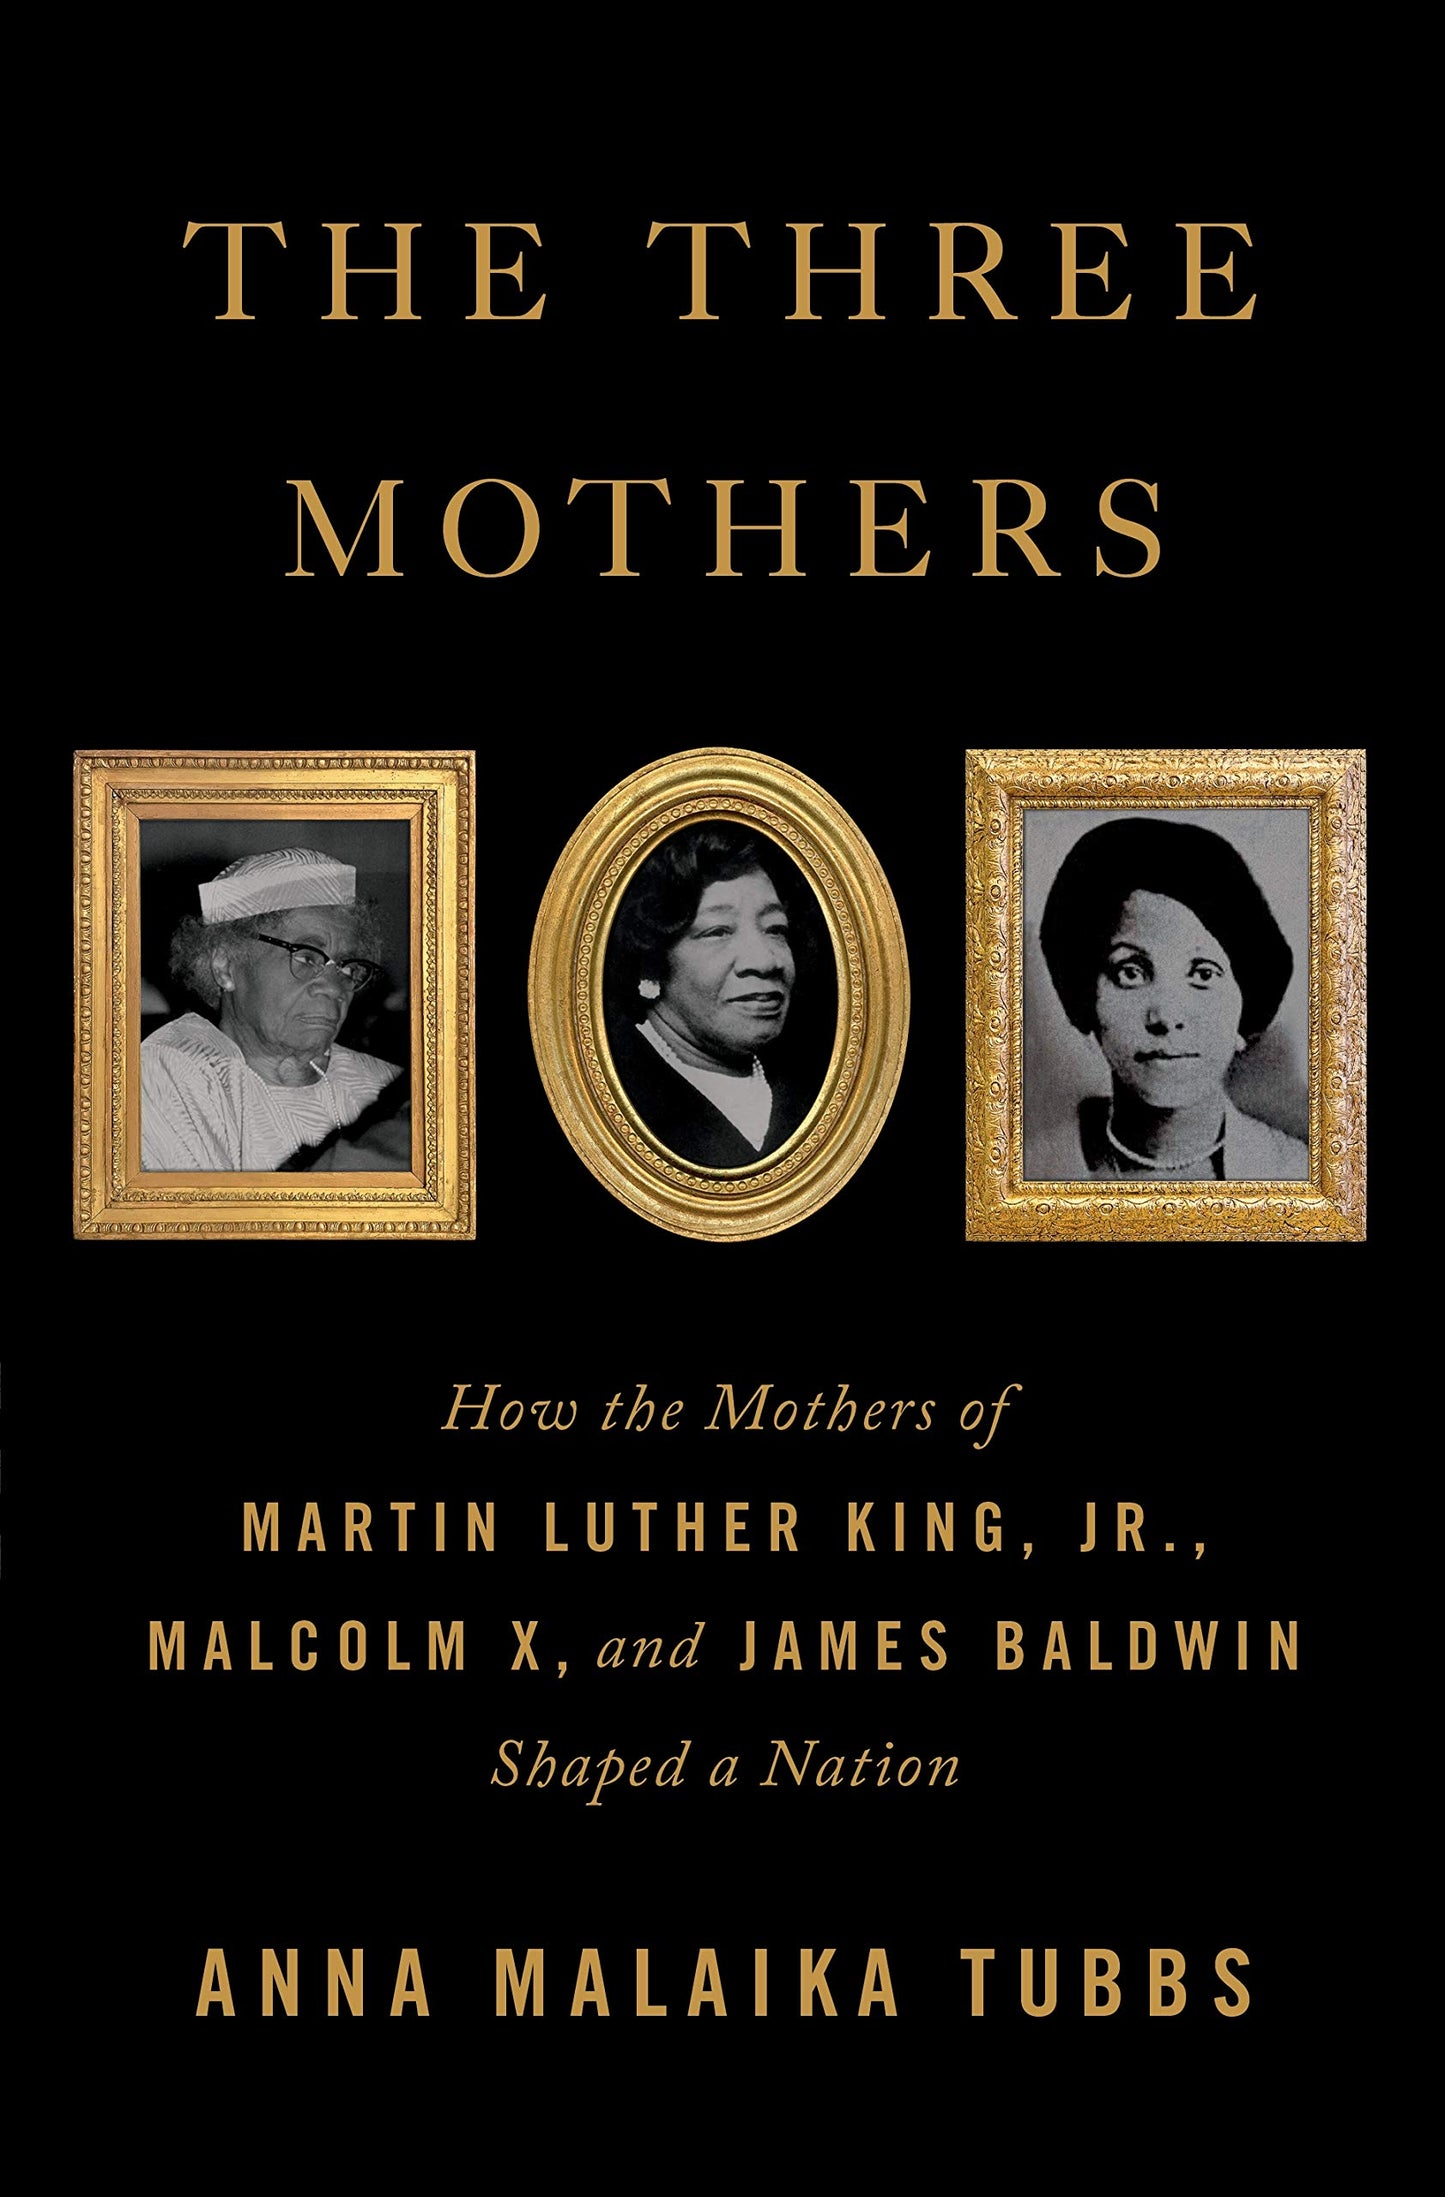 The Three Mothers // How the Mothers of Martin Luther King, Jr., Malcolm X, and James Baldwin Shaped a Nation